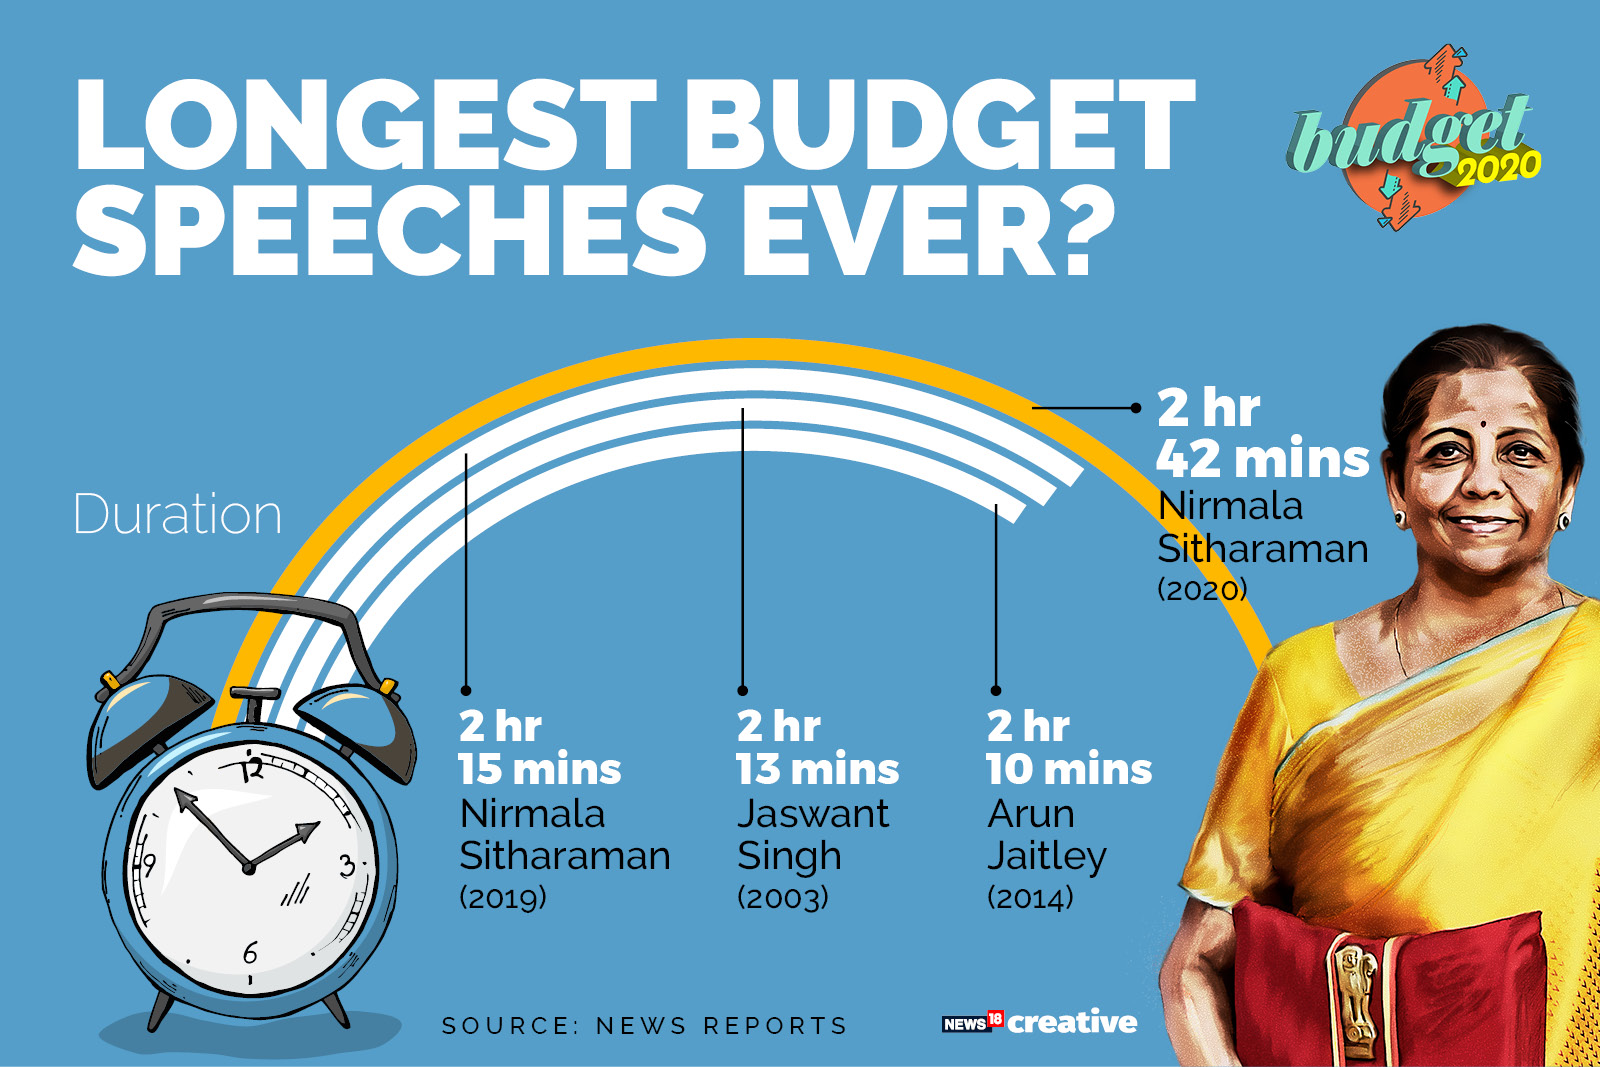 Nirmala Sitharaman Delivers Longest Budget Speech Ever - Forbes India